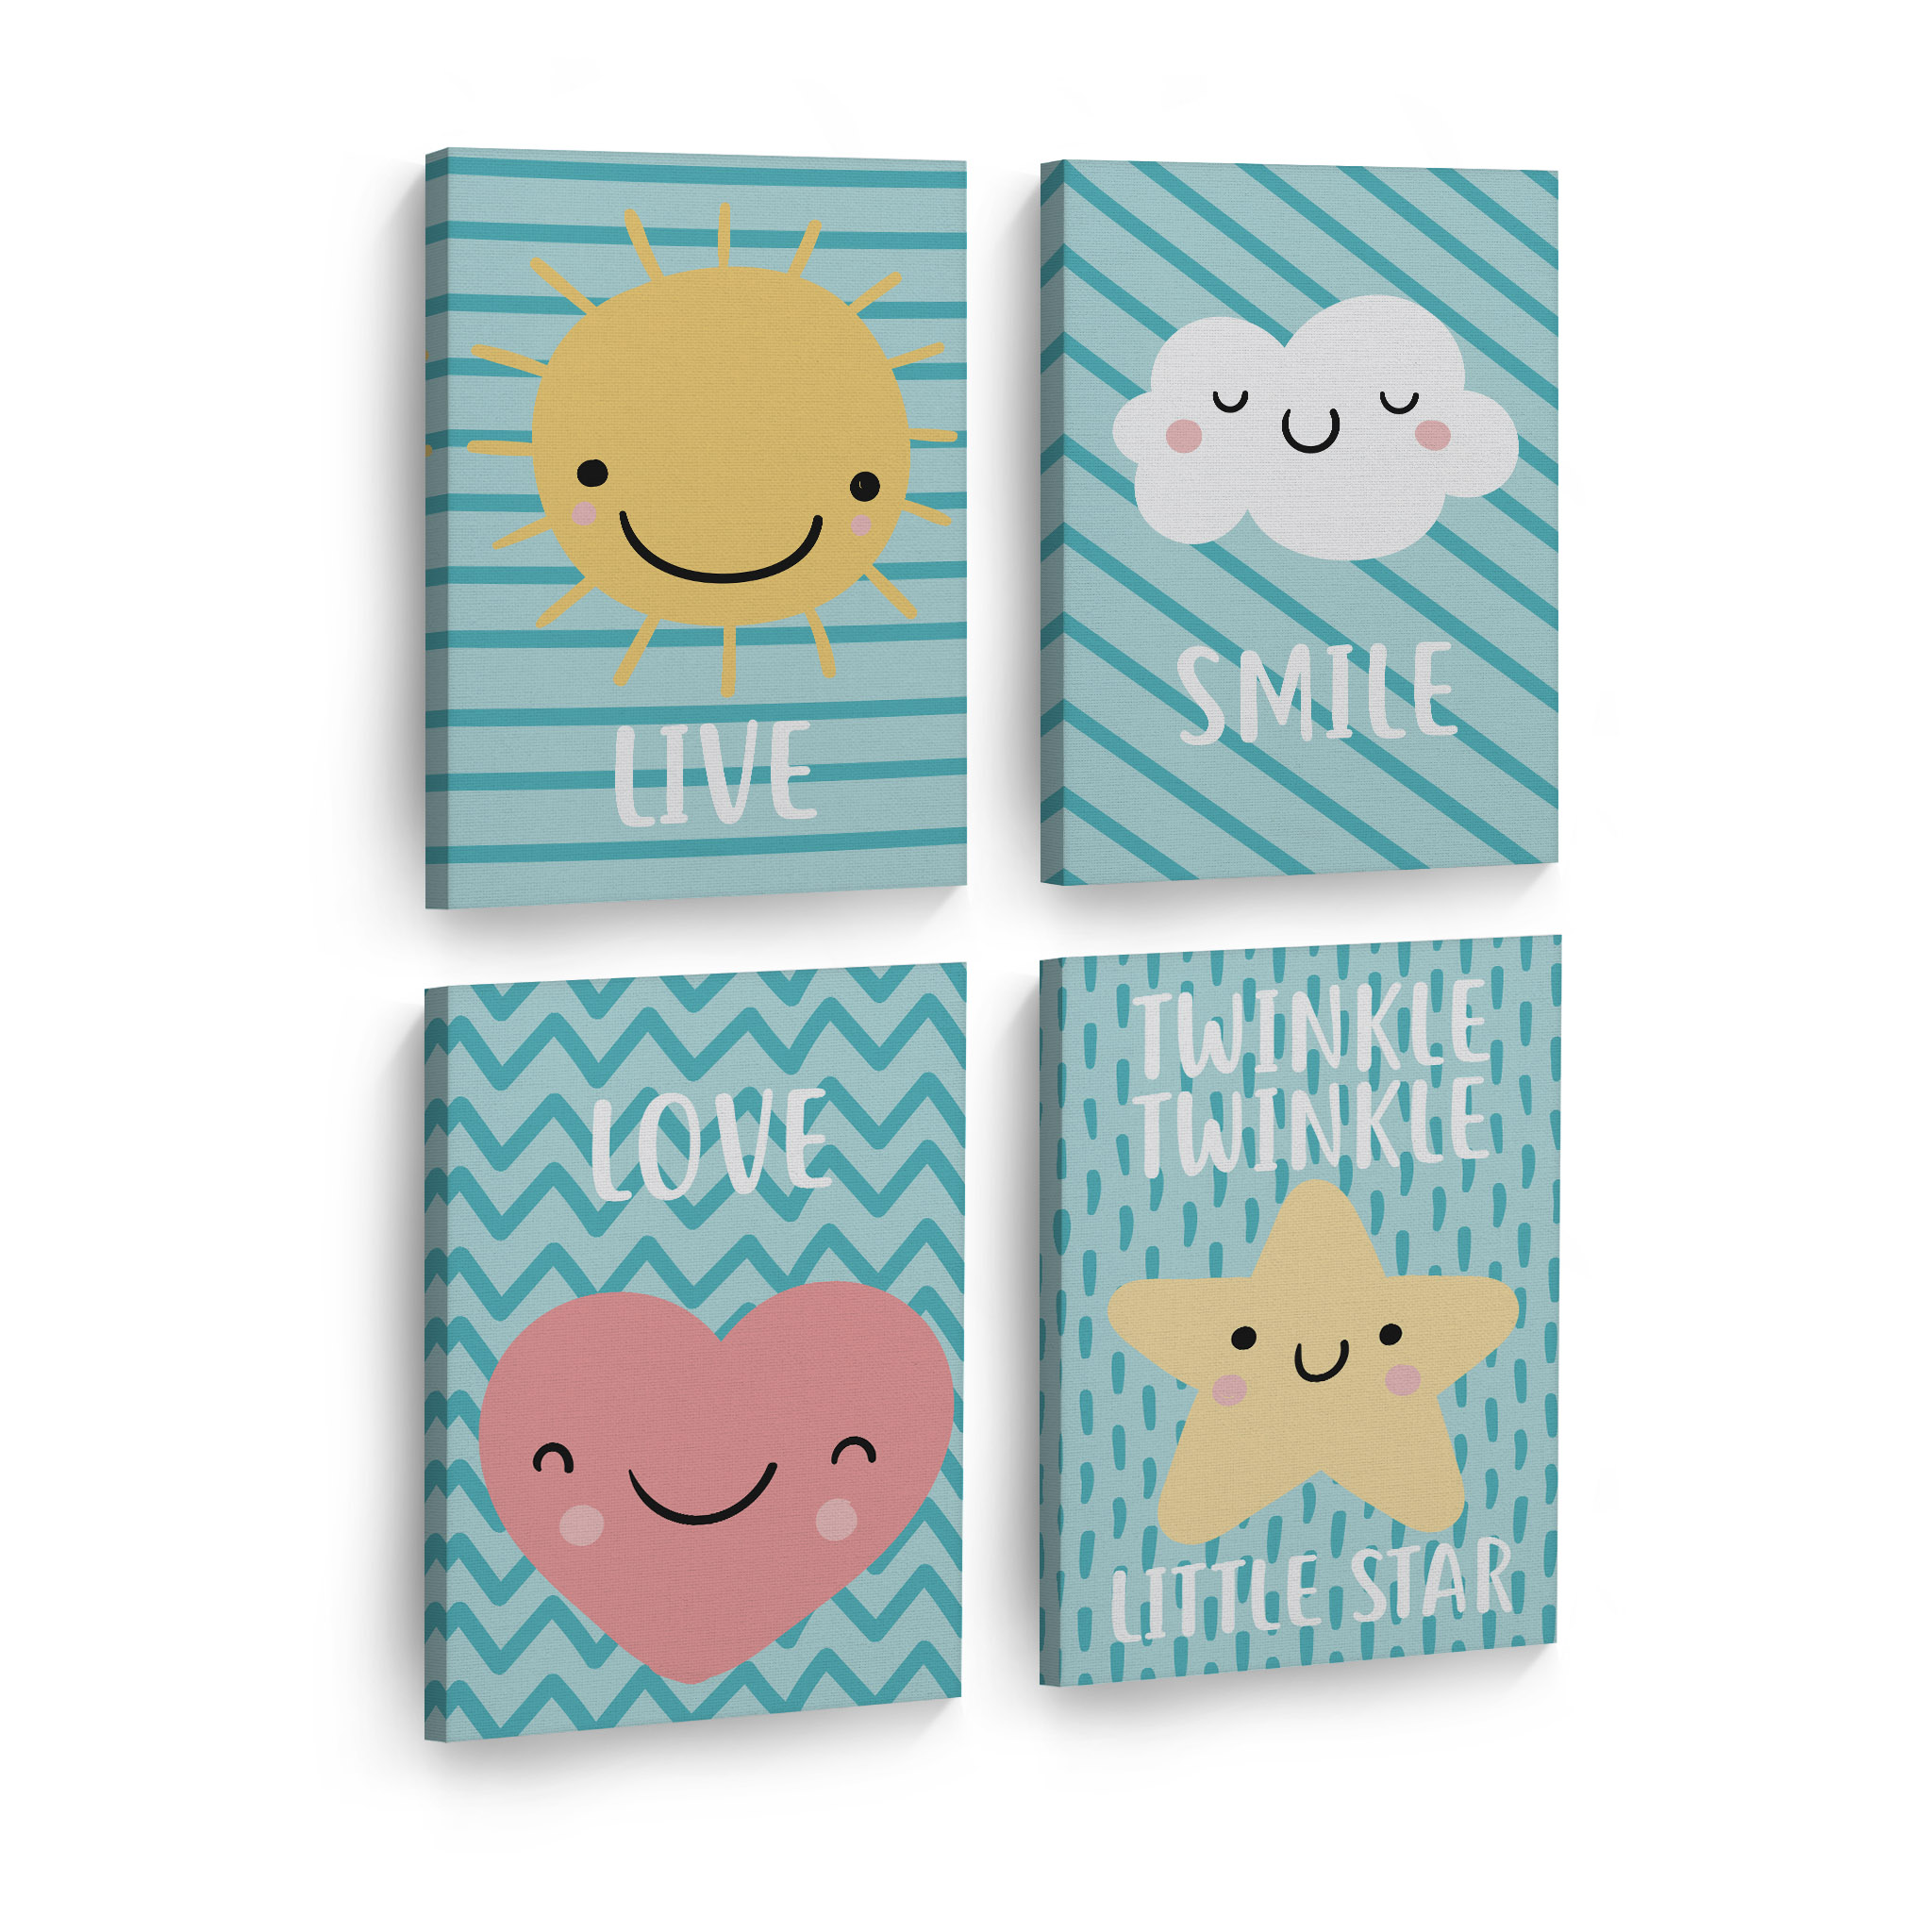 10％OFF】 Smile Decor Art Take Design It White Live Smile Smile Sloth Quote  Love Art Twinkle Relax Wall Design Twinkle Little Easy Star Blue Background  Piece Canvas Print Set Kids Room